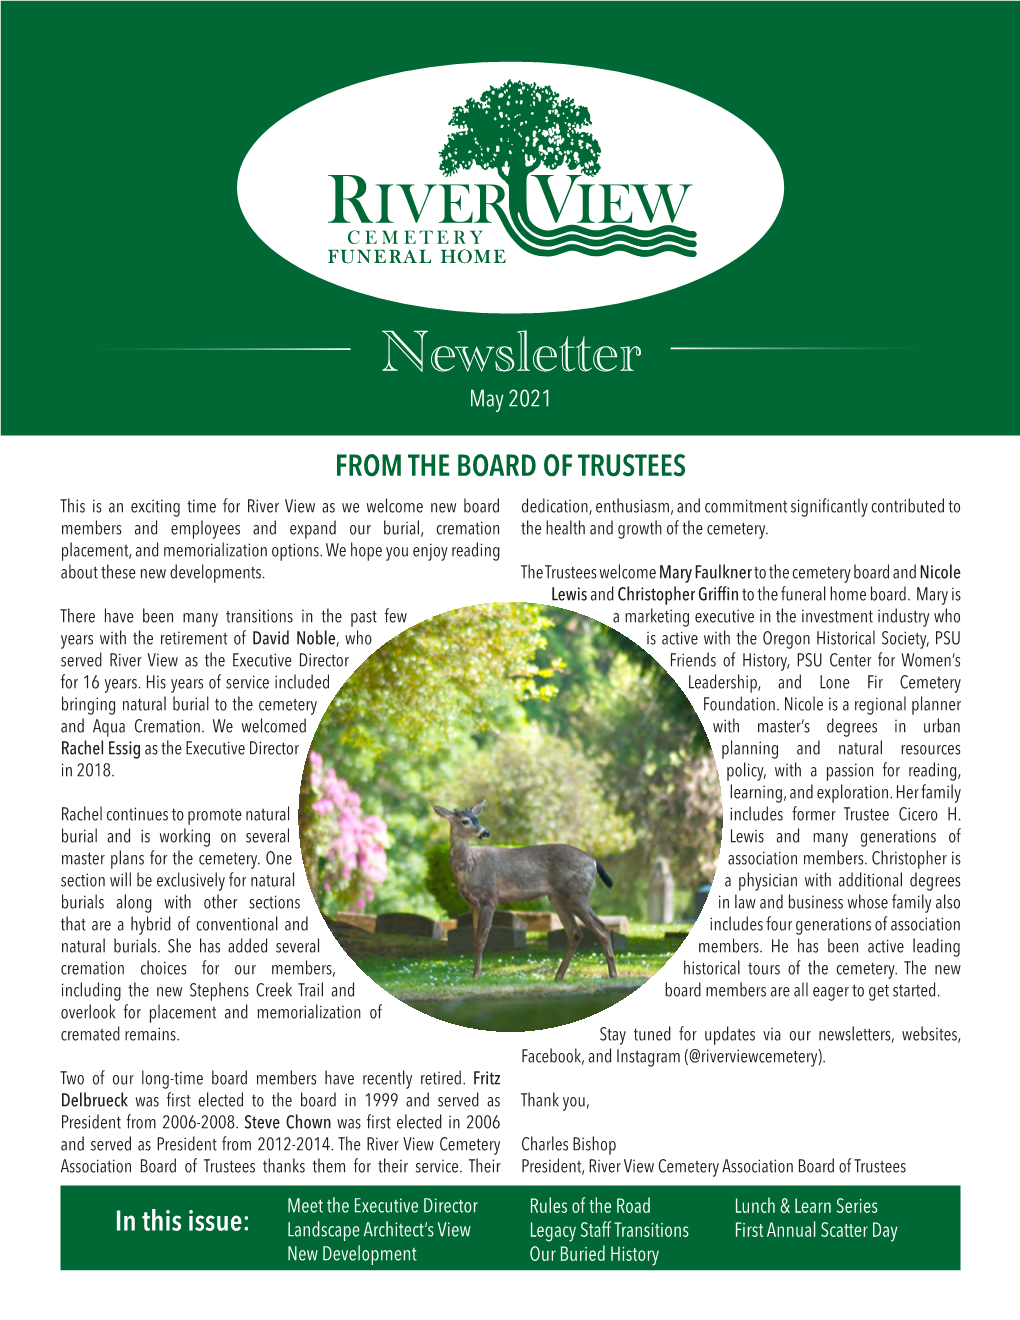 River View Cemetery Funeral Home Newsletter 2021-05